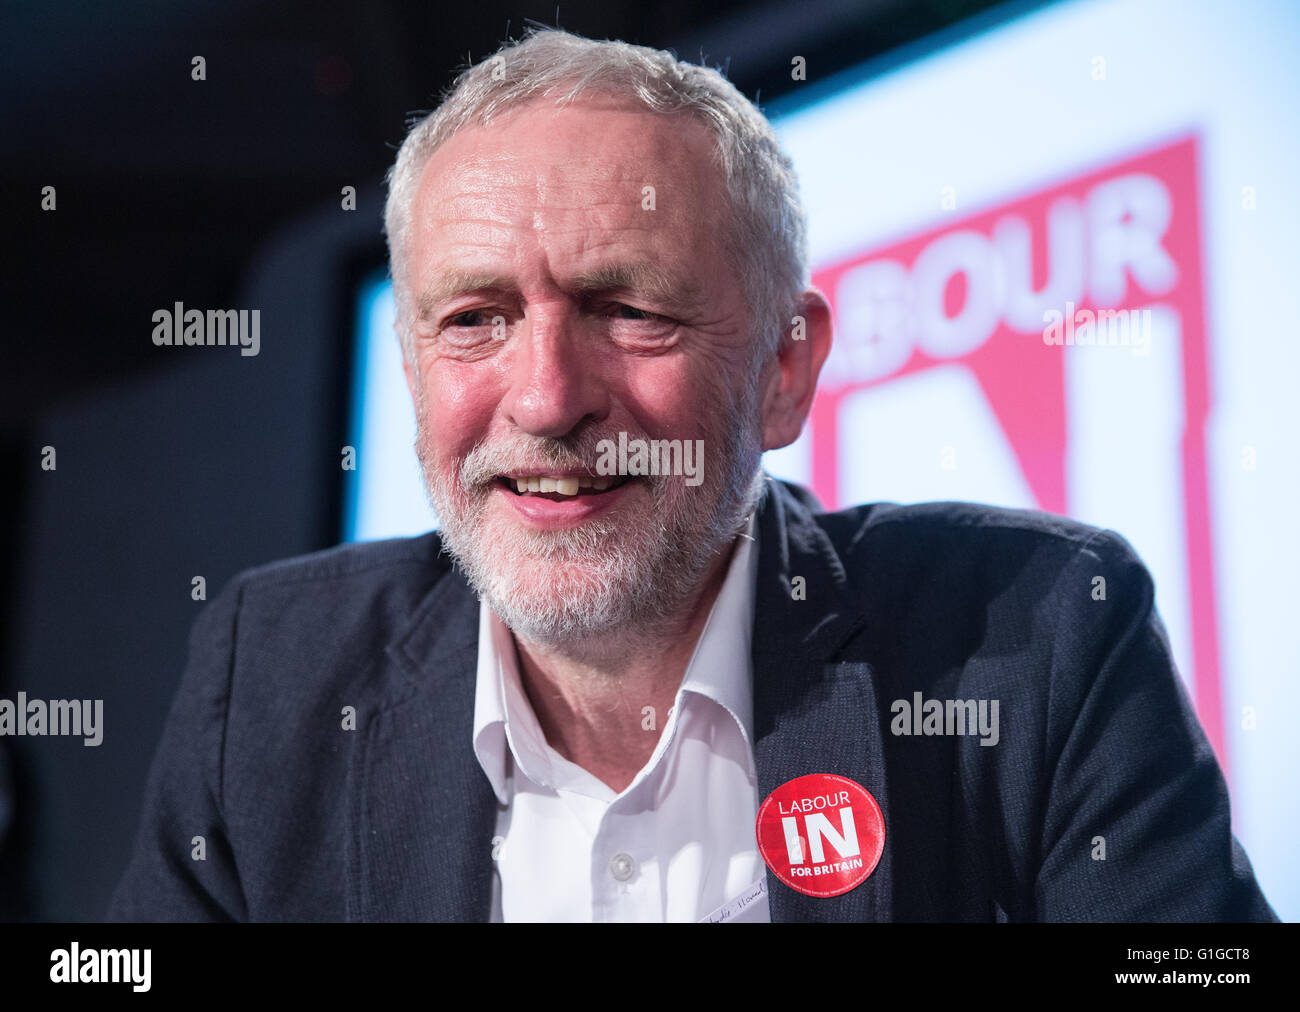 Labour leader Jeremy Corbyn speaks at a 'Vote to remain June 23rd' rally in Westminster,London.He is supporting 'Vote In' Stock Photo